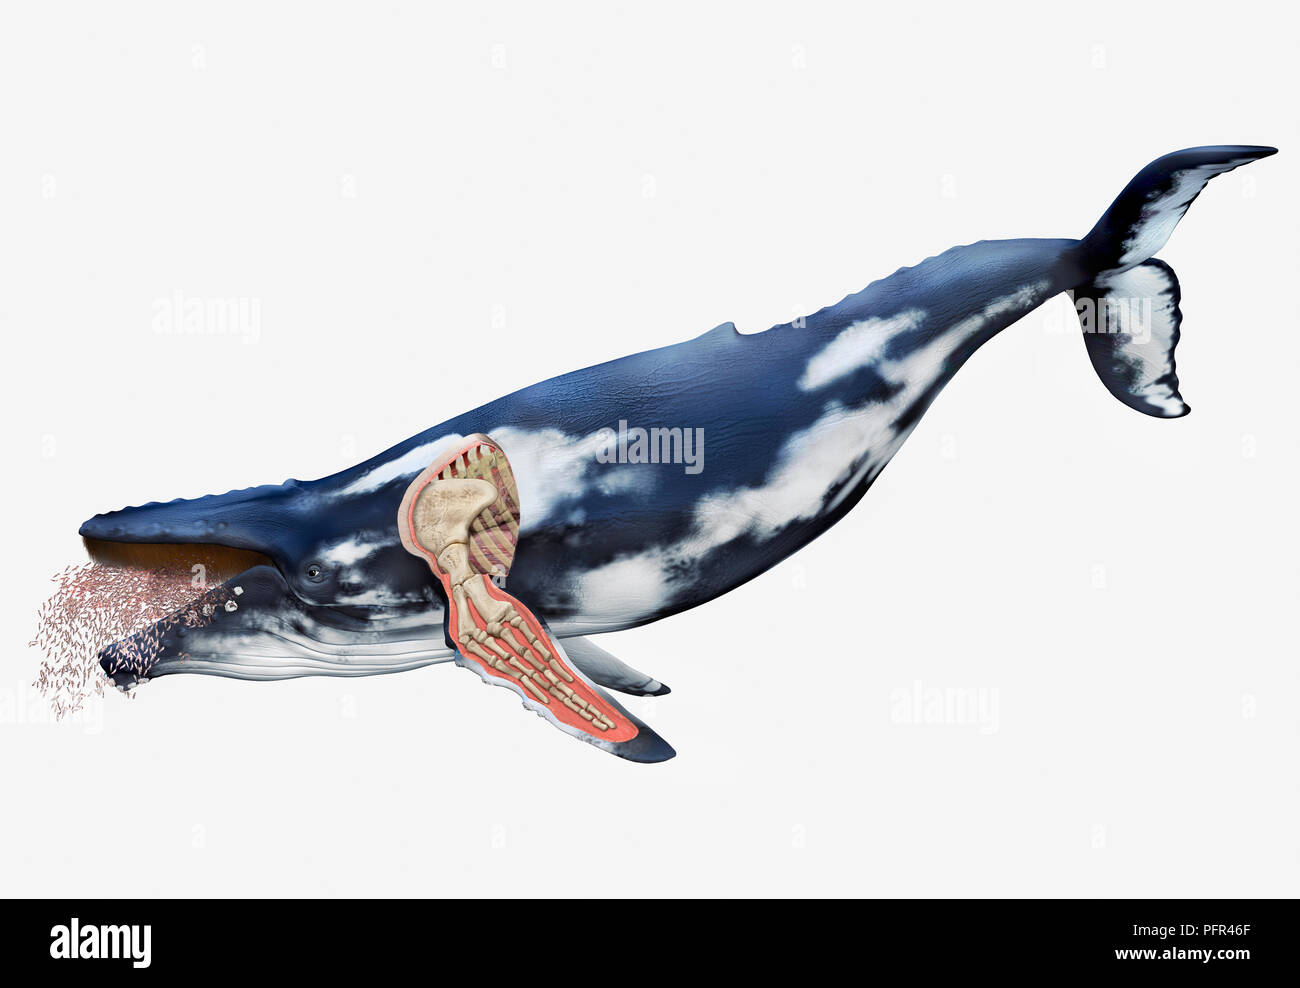 Digital illustration of whale with bone structure of fins visible, cutaway Stock Photo